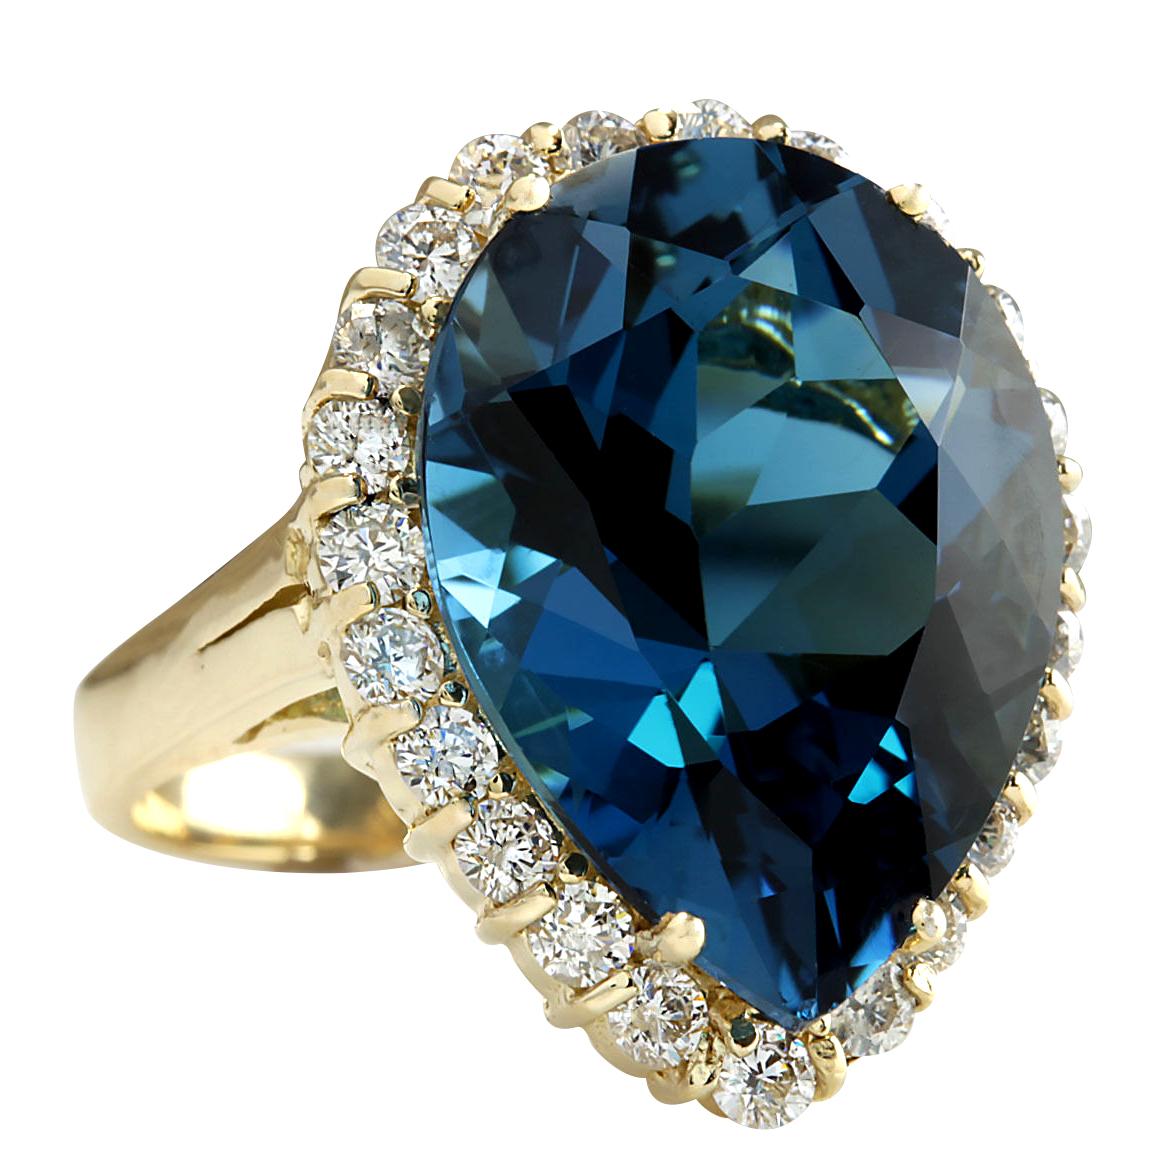 18.48 Carat Natural Topaz 14 Karat Yellow Gold Diamond Ring
Stamped: 14K Yellow Gold
Total Ring Weight: 8.0 Grams
Total Natural Topaz Weight is 17.28 Carat (Measures: 20.00x15.00 mm)
Color: London Blue
Total Natural Diamond Weight is 1.20